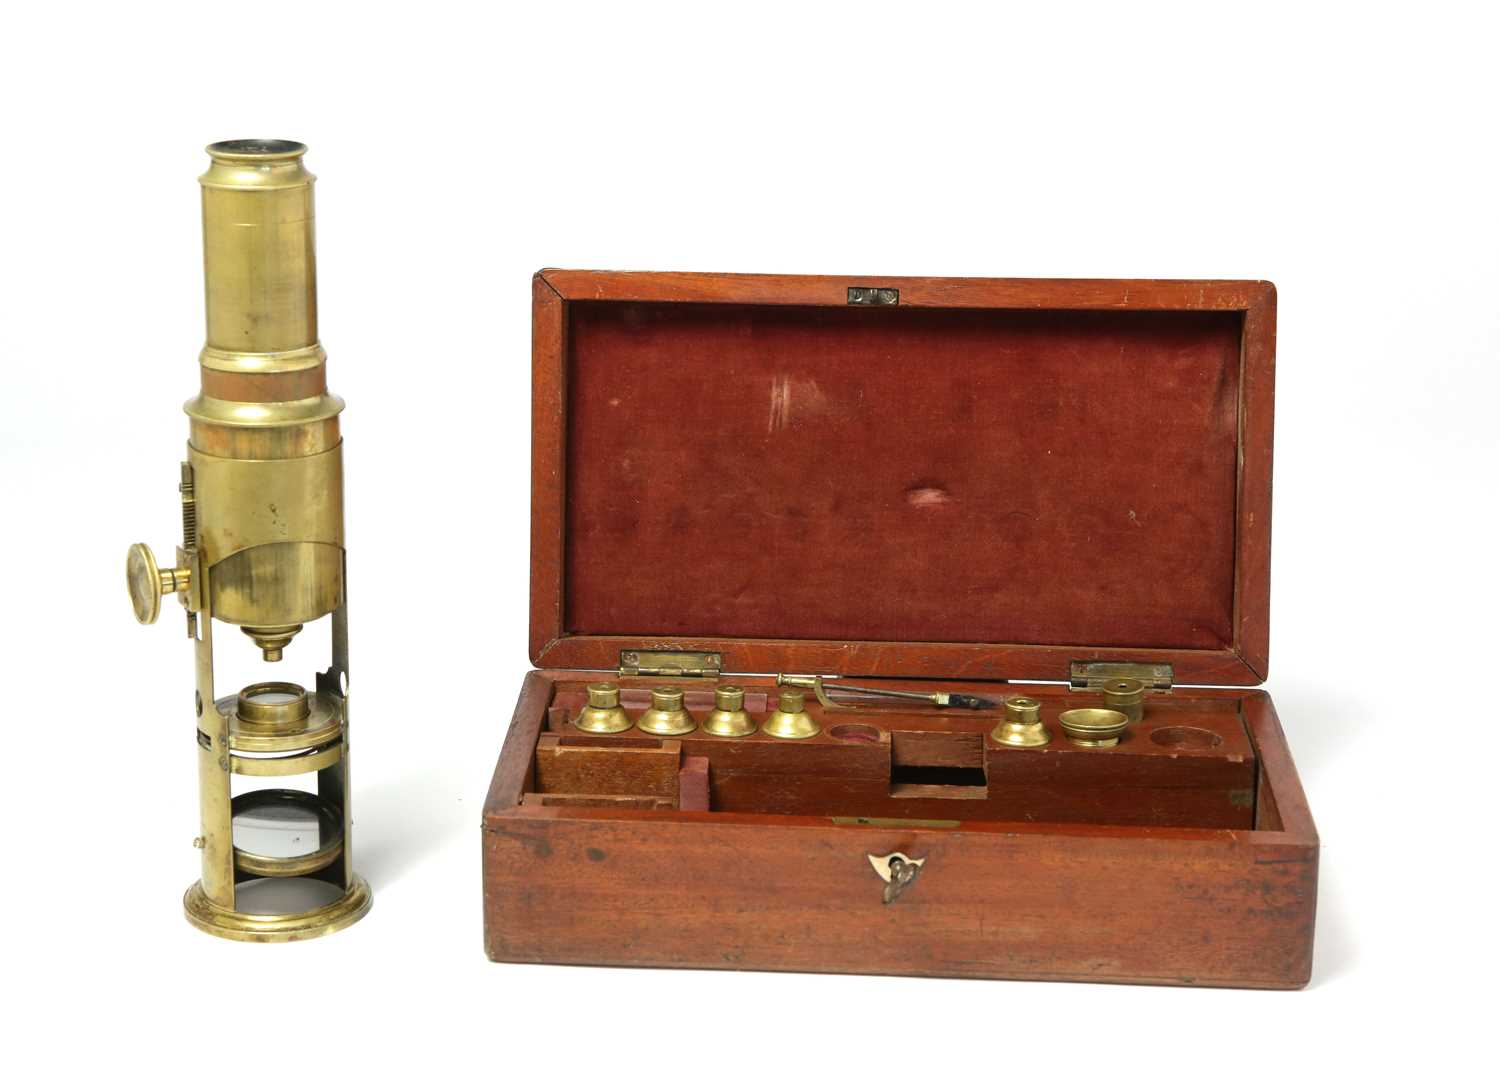 Lot 56 - A Martin-Type Improved Compound Drum Microscope, ca 1850